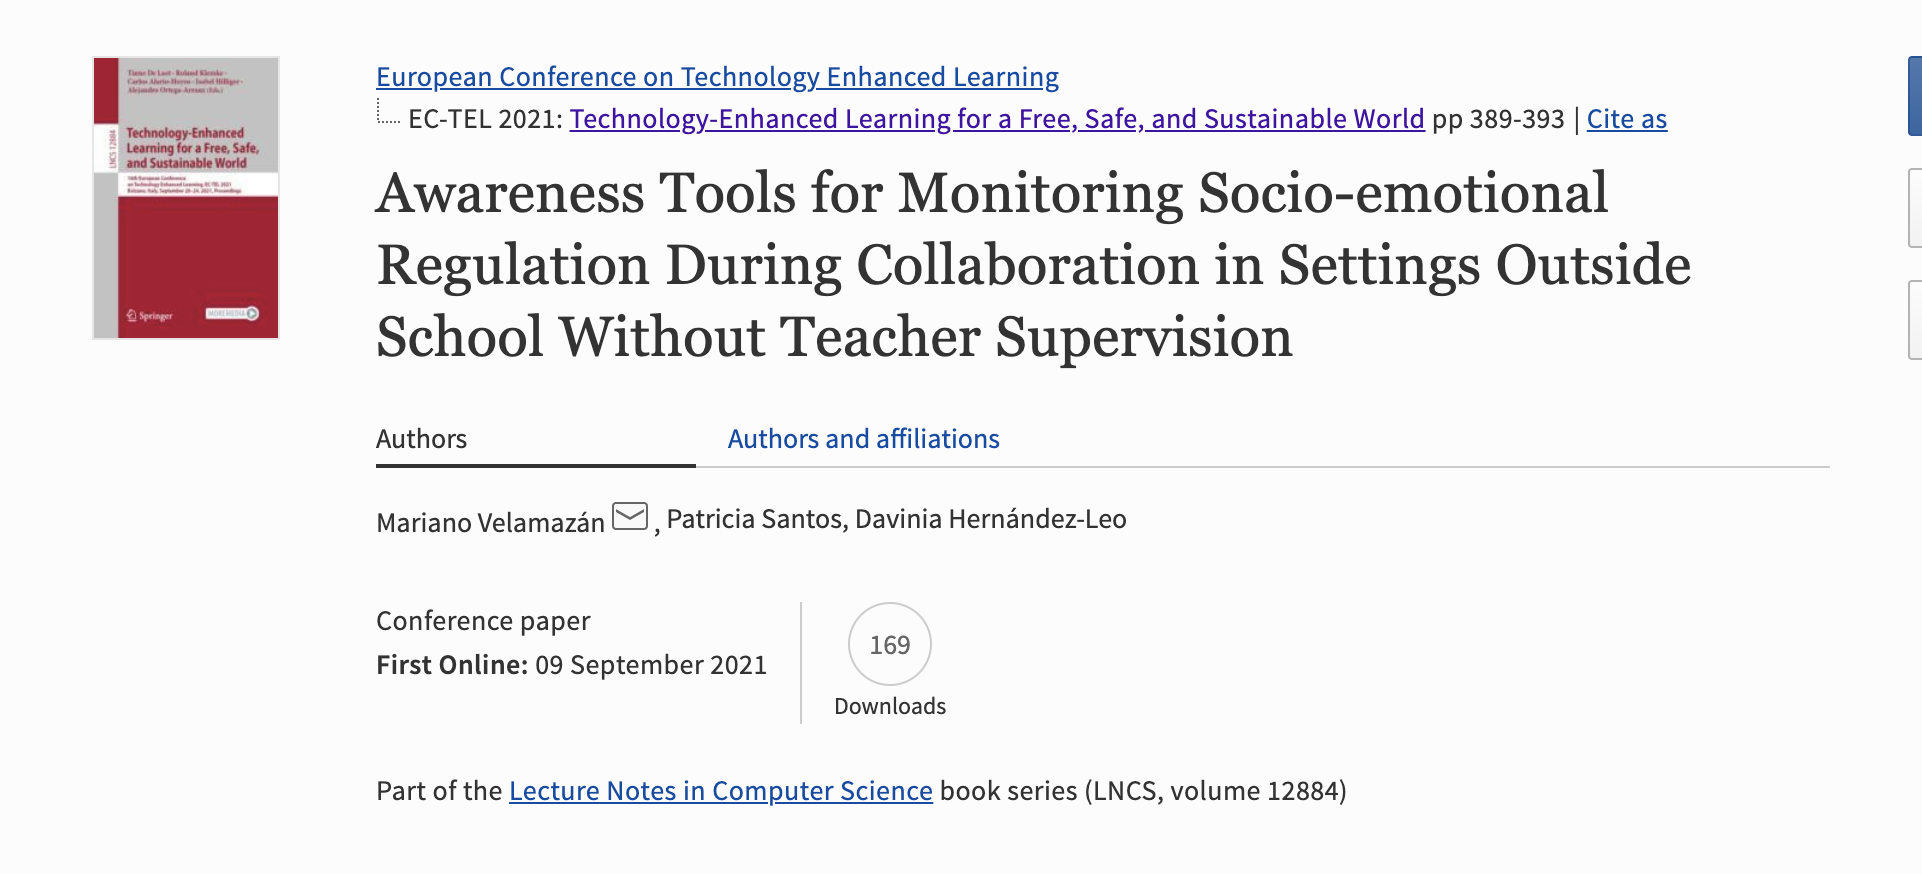 ECTEL2021 demo paper: Awareness Tools for Monitoring Socio-emotional Regulation During Collaboration in Settings Outside School Without Teacher Supervision